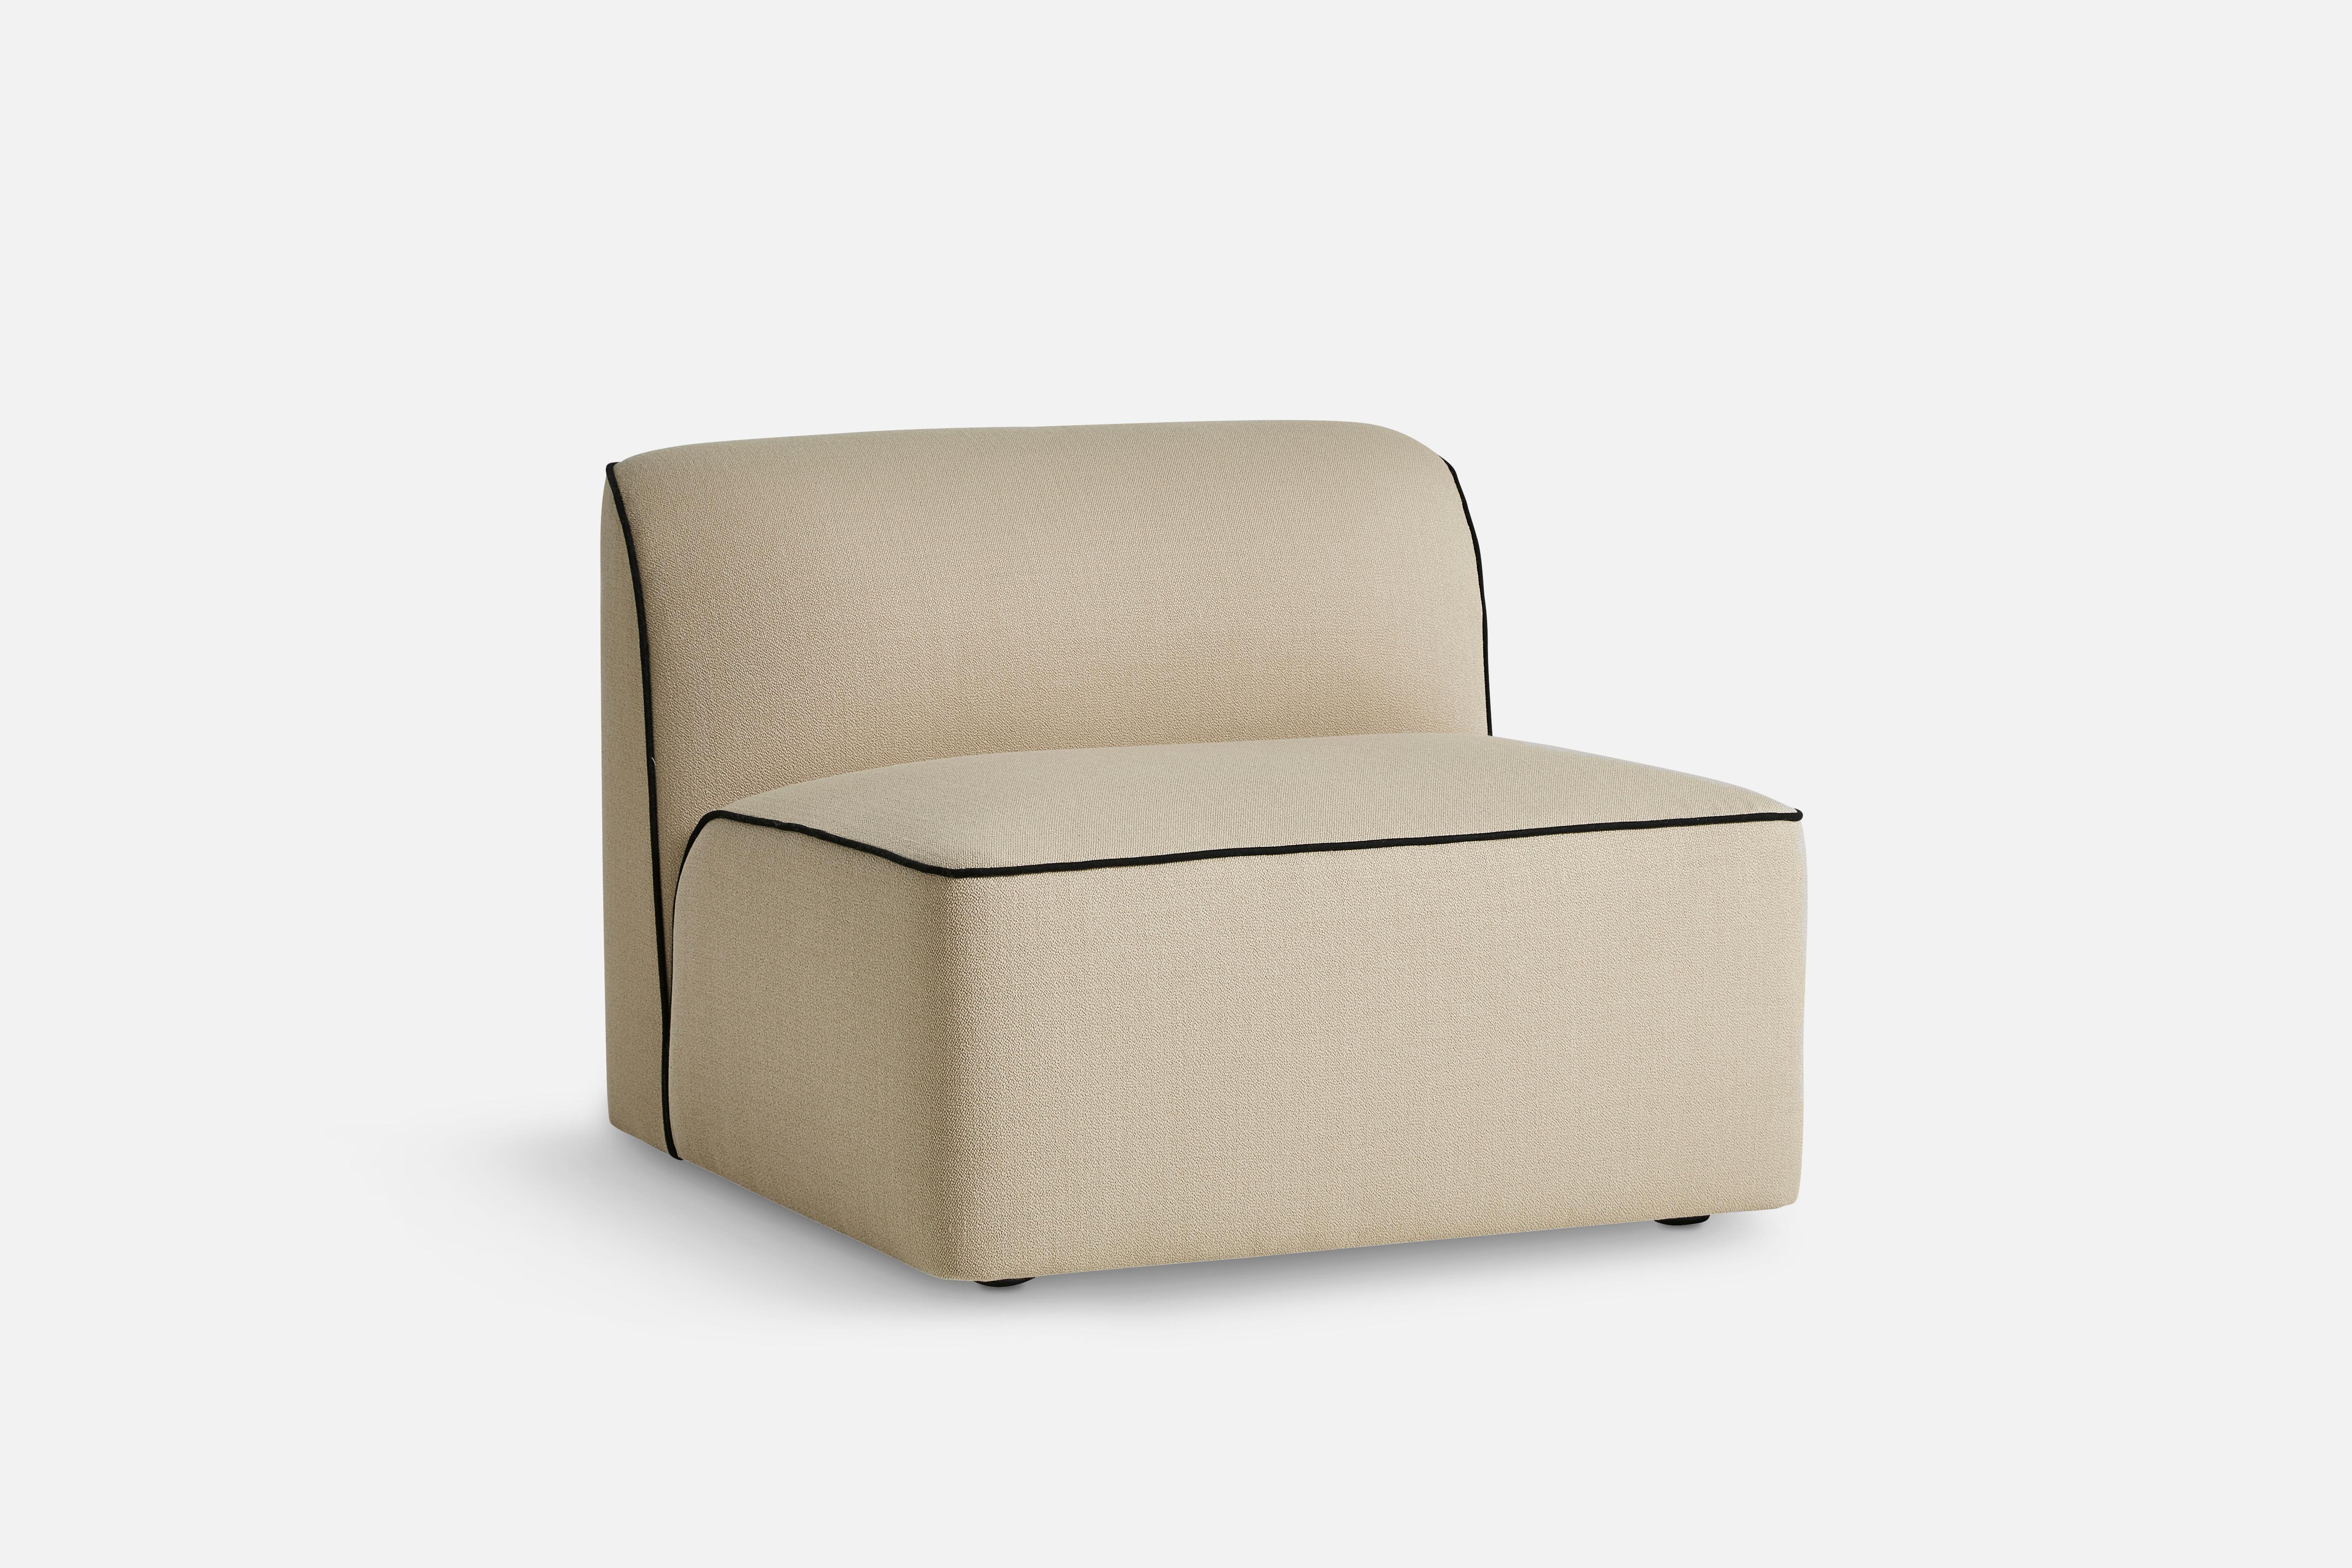 Flora middle module 90 by Yonoh
Materials: Plywood, Foam, Webbing, Wood, fabric (Kvadrat Vidar 0323)
Dimensions: D 90 x W 90 x H 70 cm
Also available in different colours and materials. 

The founders, Mia and Torben Koed, decided to put their